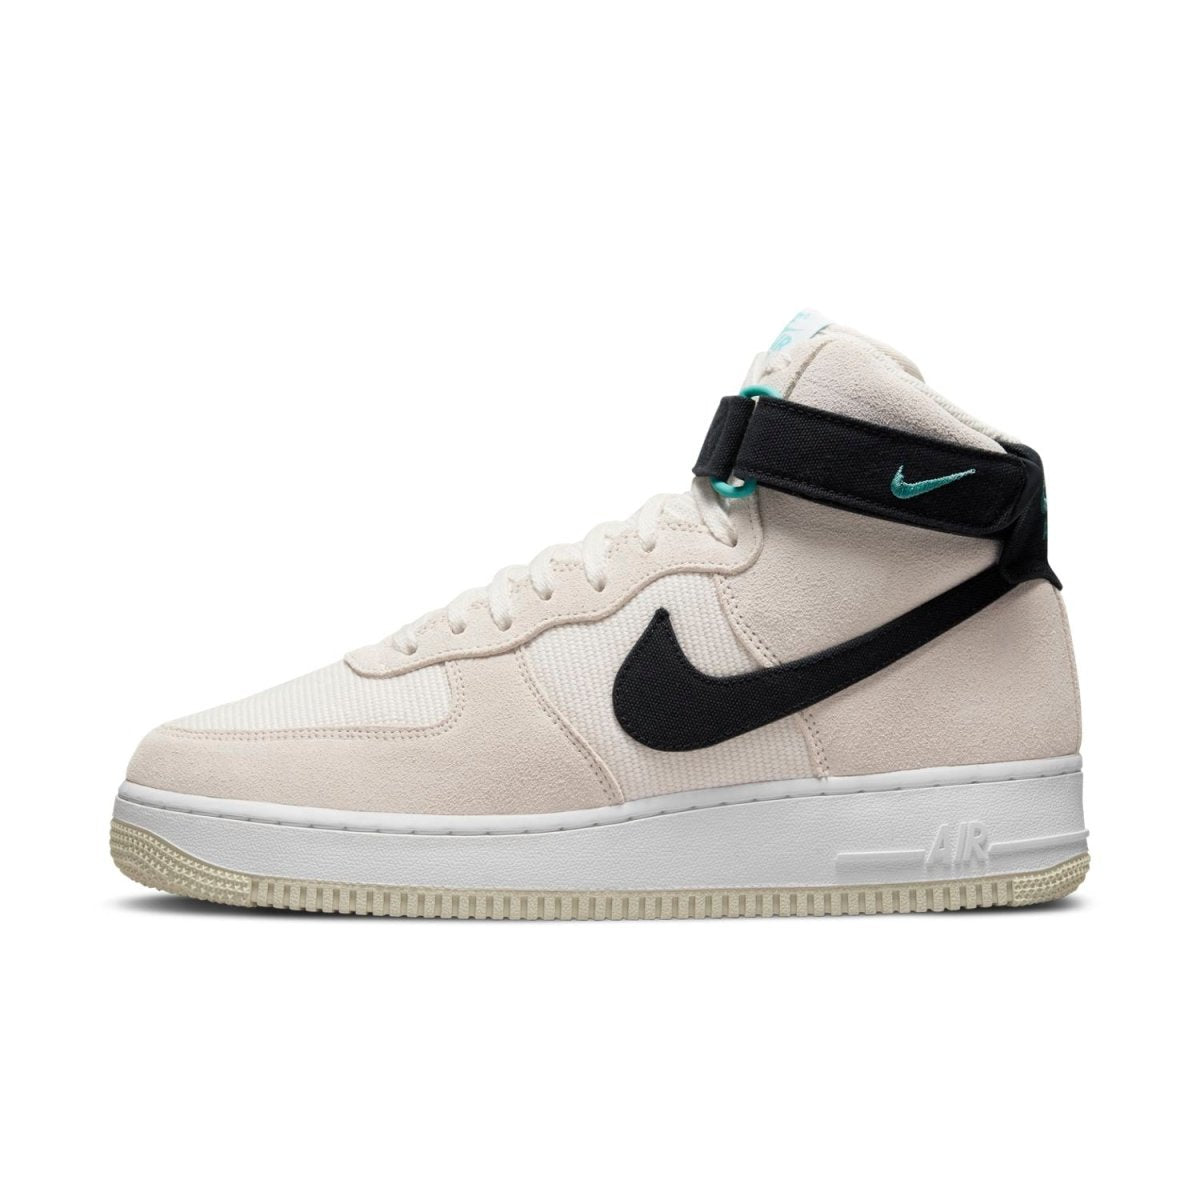 Nike Air Force 1 High '07 LX (DH7566-100) - STNDRD ATHLETIC CO.